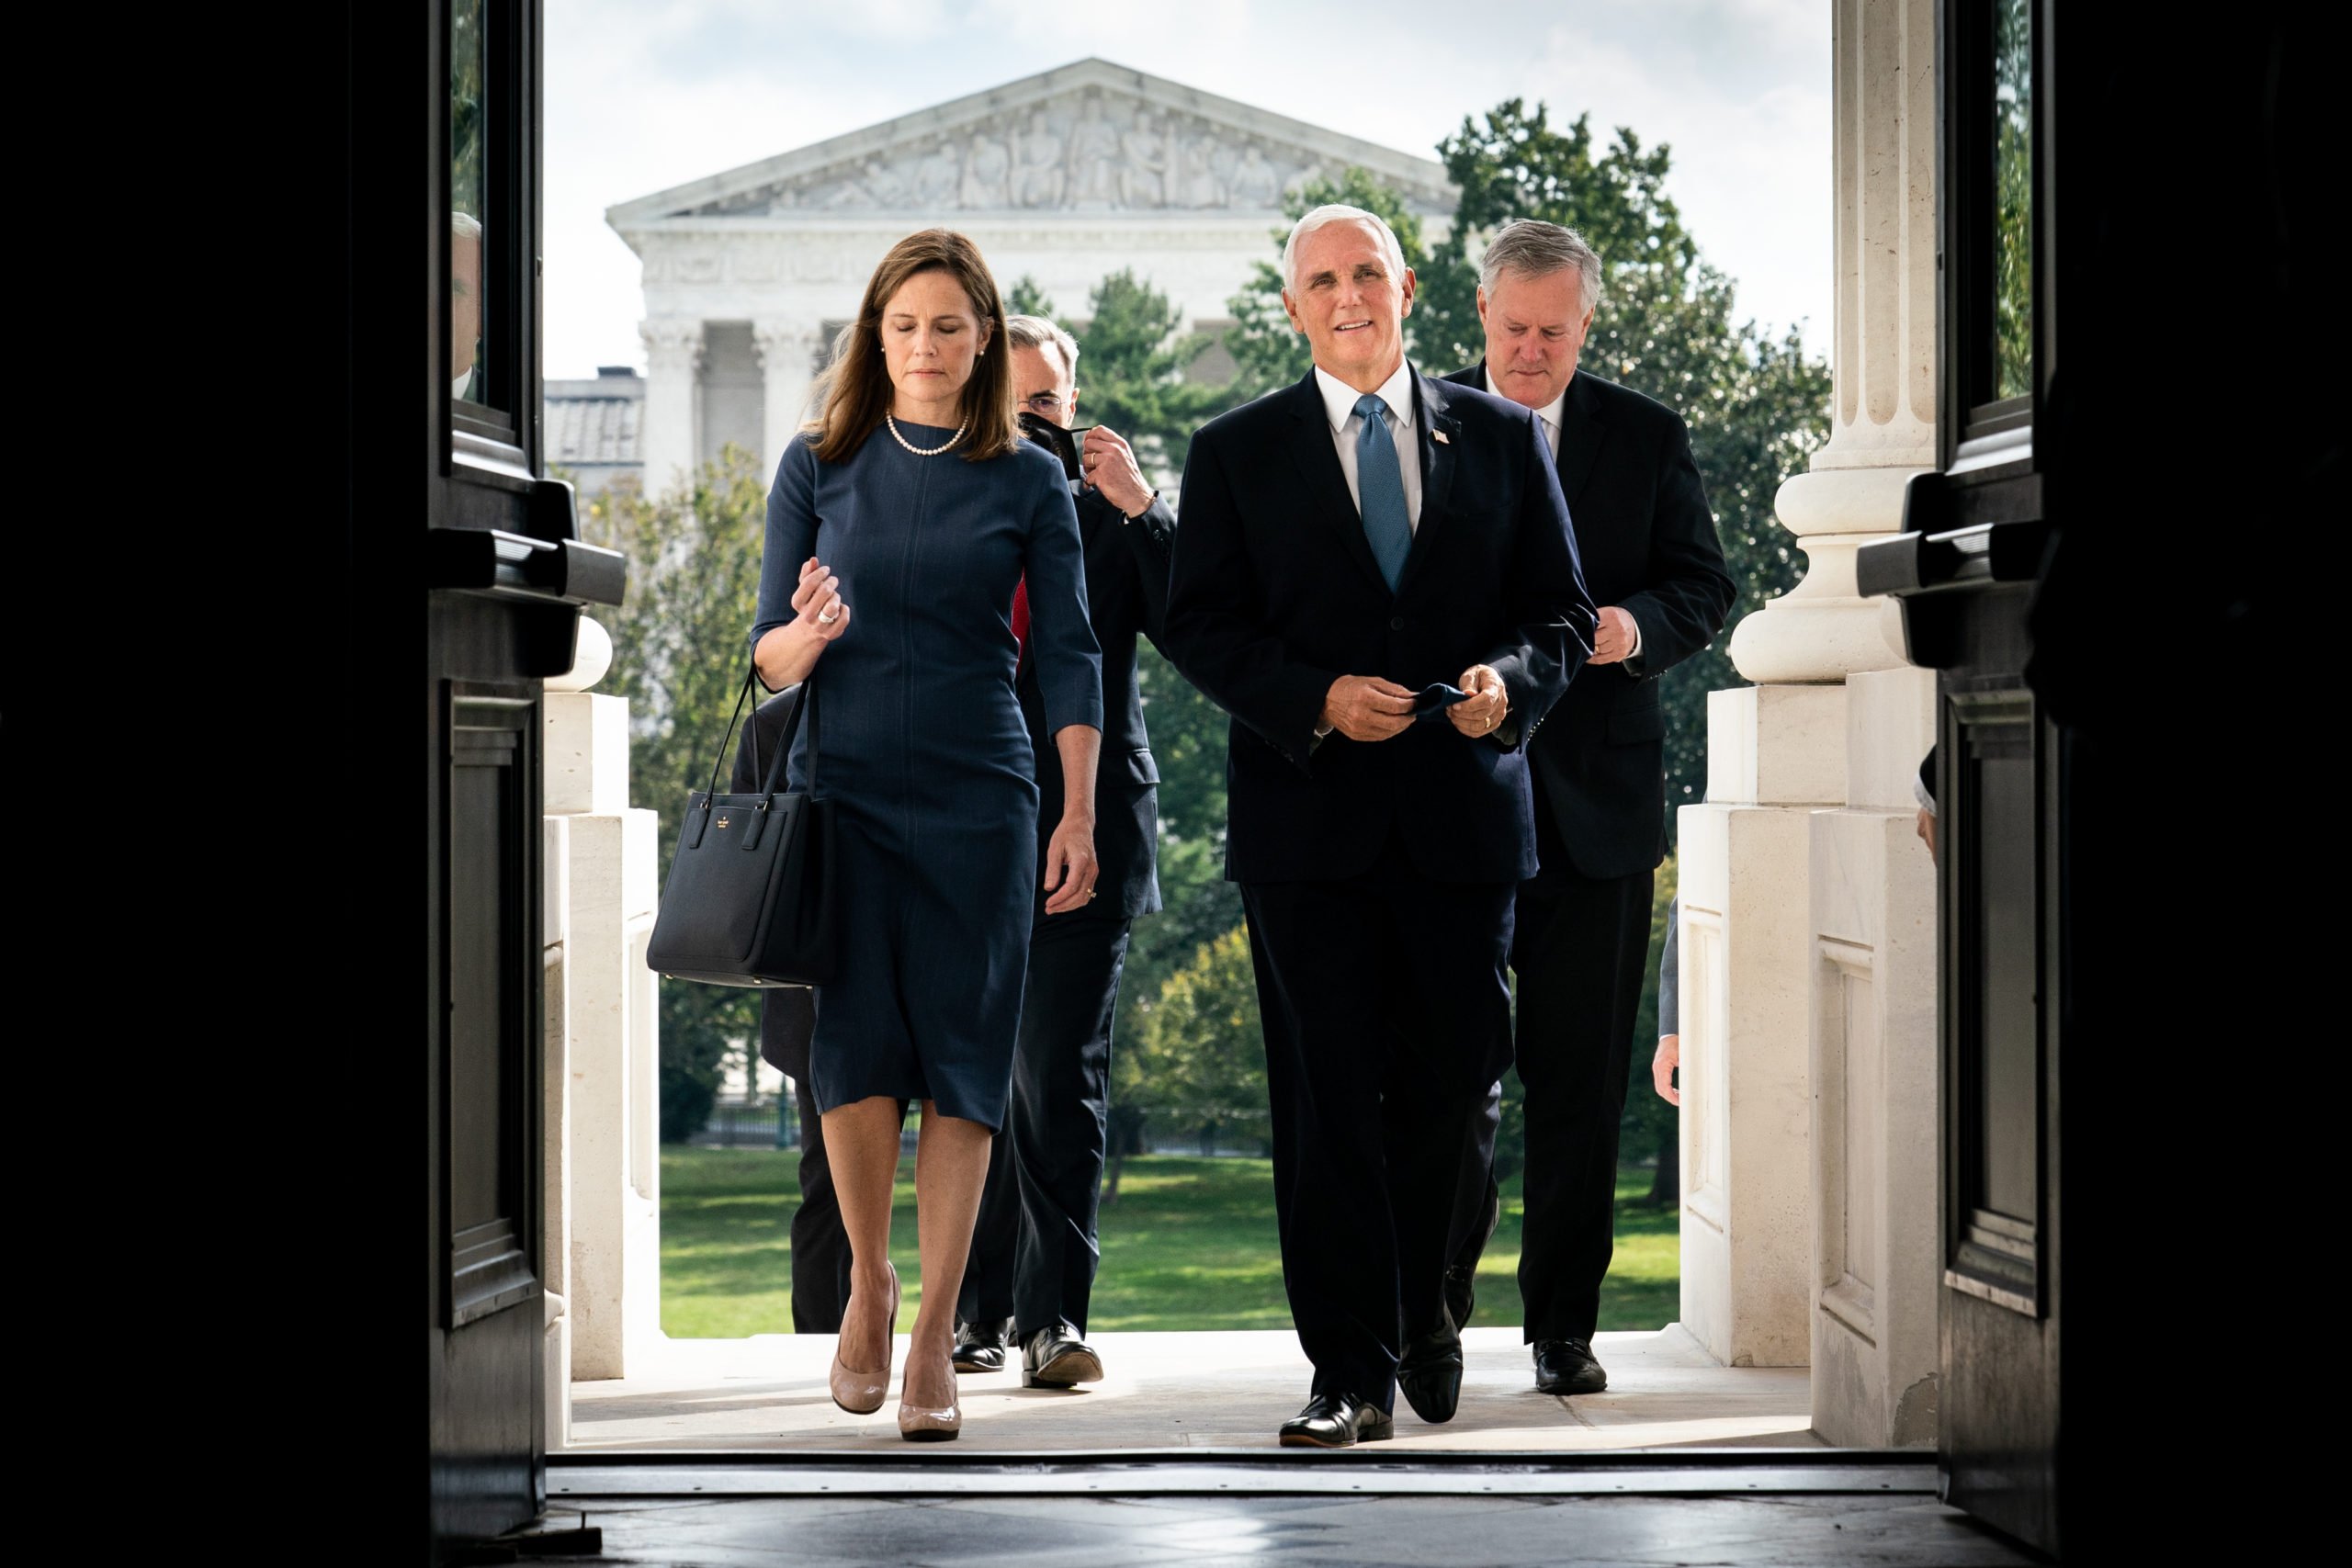 WASHINGTON, DC - SEPTEMBER 29: Seventh U.S. Circuit Court Judge Amy Coney Barrett, President Donald Trump's nominee for the U.S. Supreme Court, and Vice President Mike Pence arrive at the U.S. Capitol where Barrett is attending a series of meetings in preparation for her confirmation hearing, on September 29, 2020 in Washington, DC. (Photo by Erin Schaff-Pool/Getty Images)